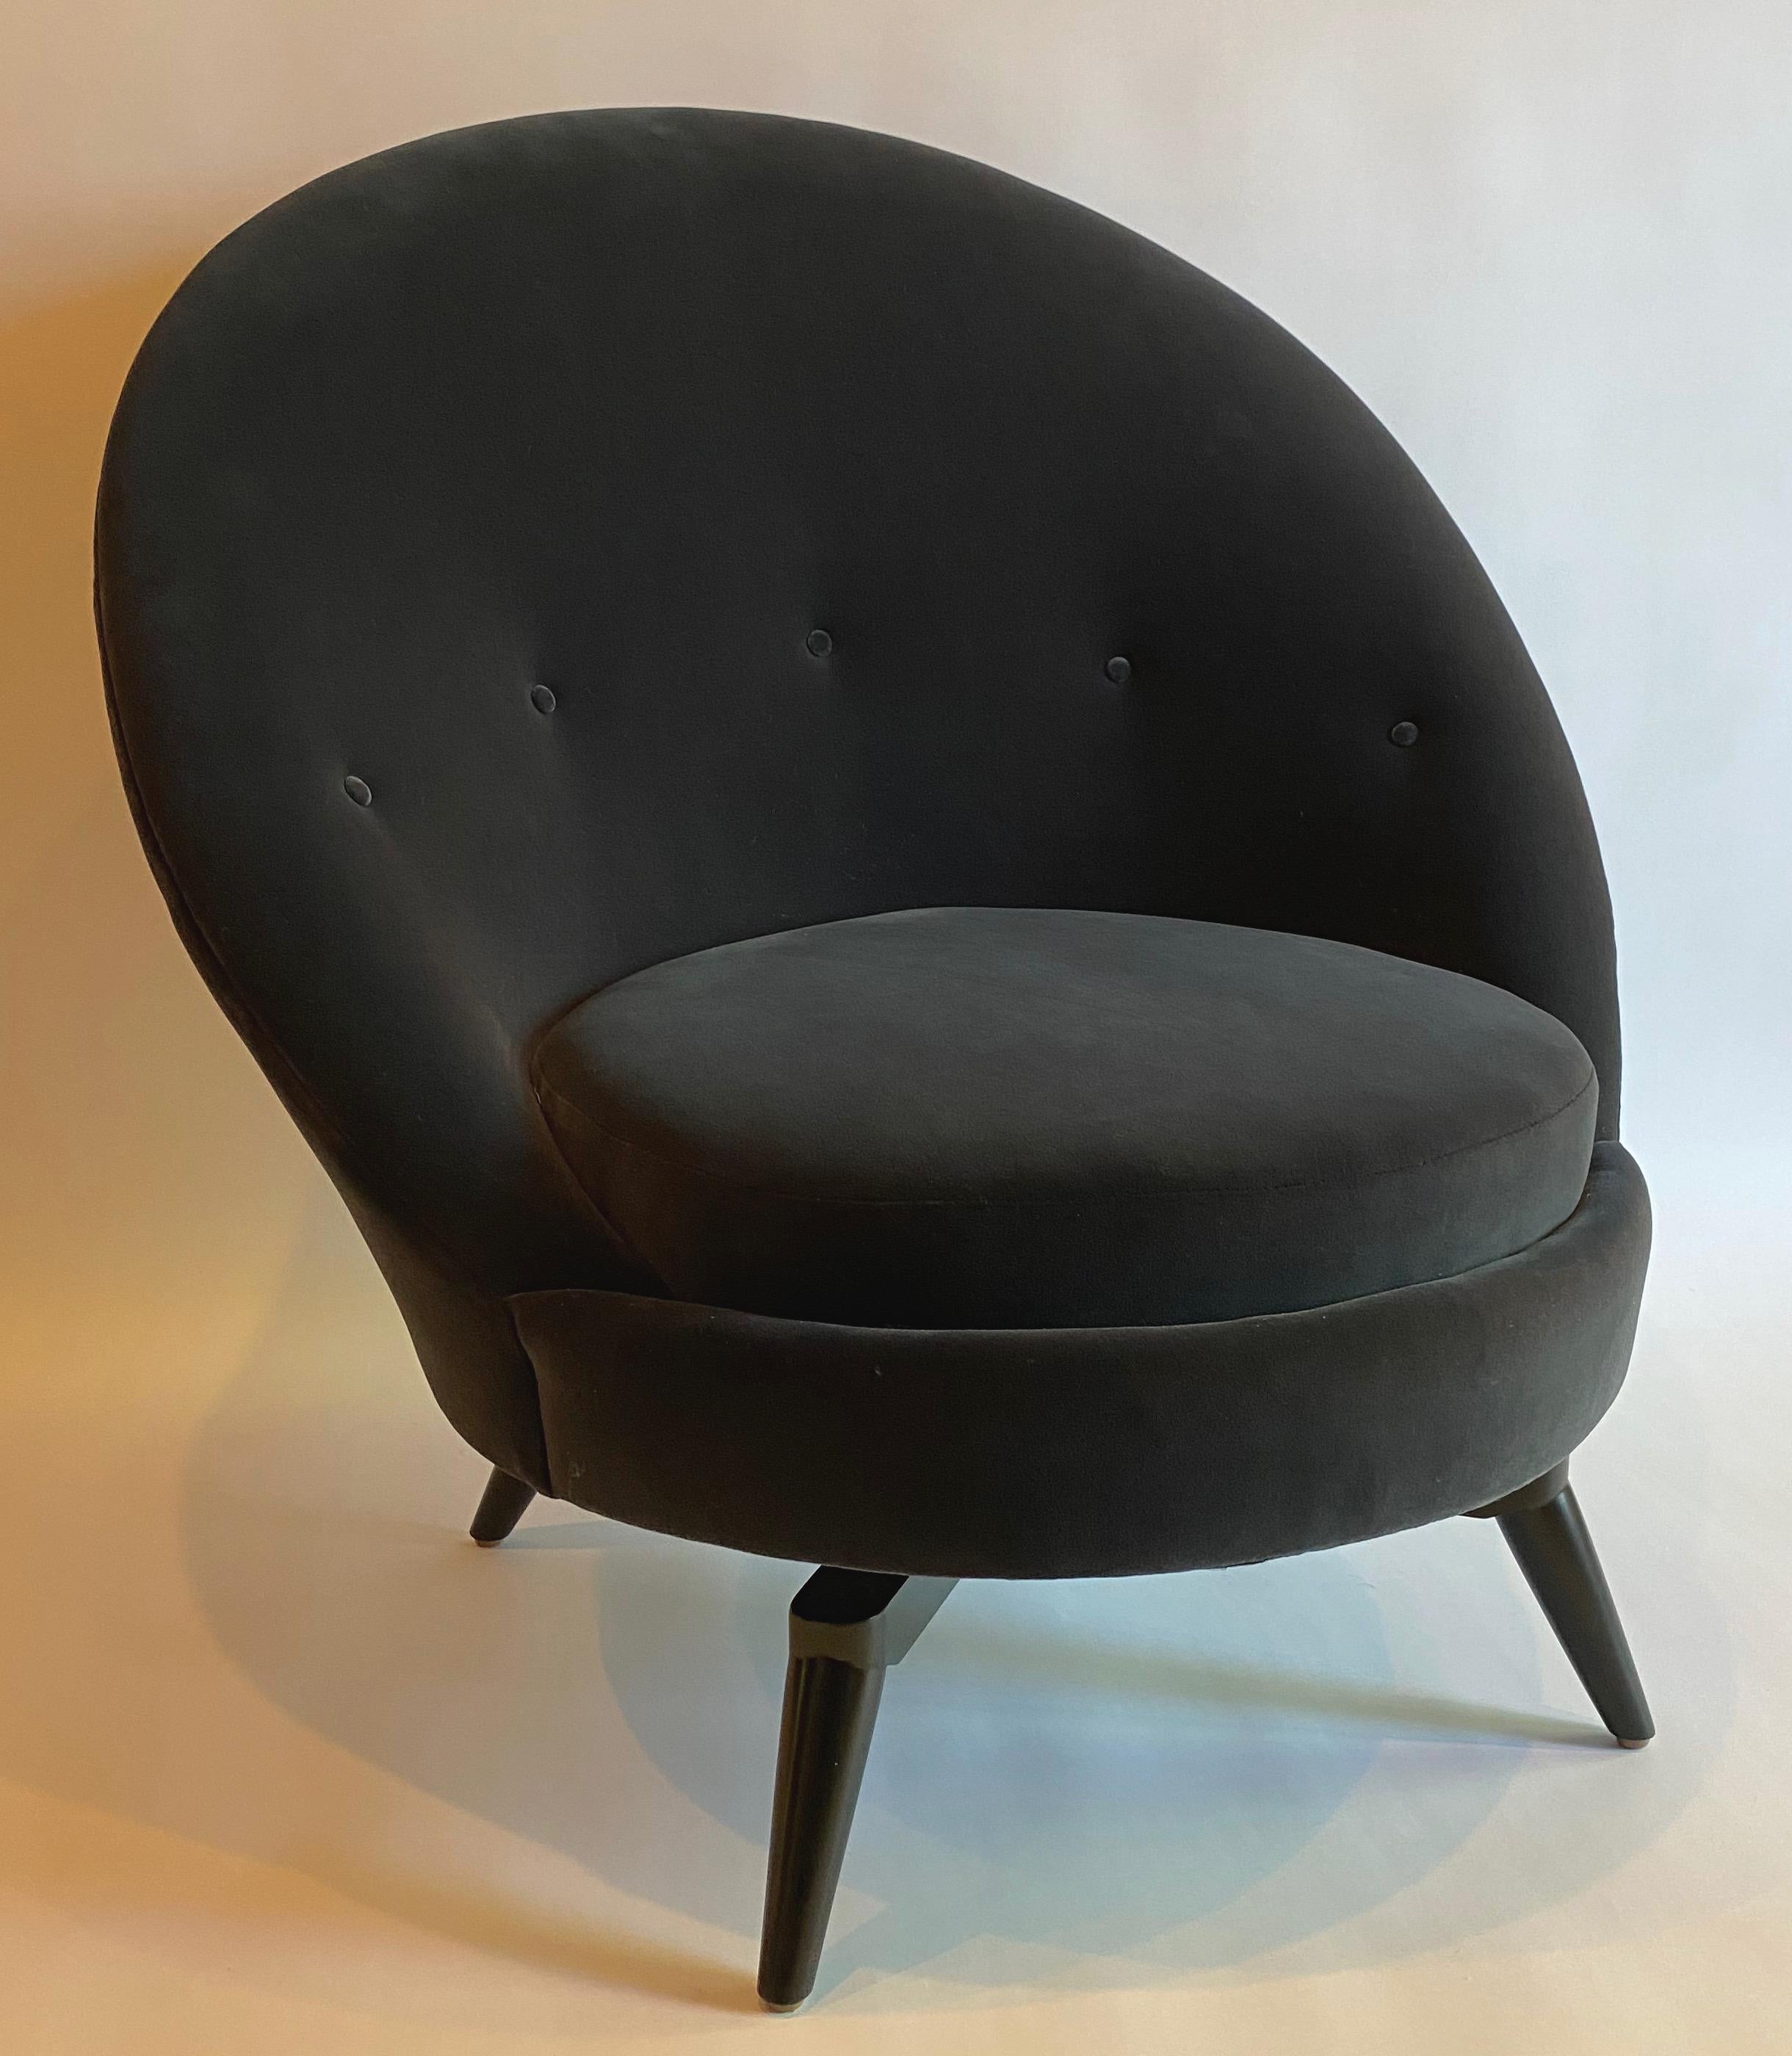 Swivel egg chair in the French midcentury style. This sophisticated chair is upholstered in heavy-weight burnt steel grey velvet. This super stylish and versatile example is as comfortable as it looks and is painstakingly patterned with a hardwood